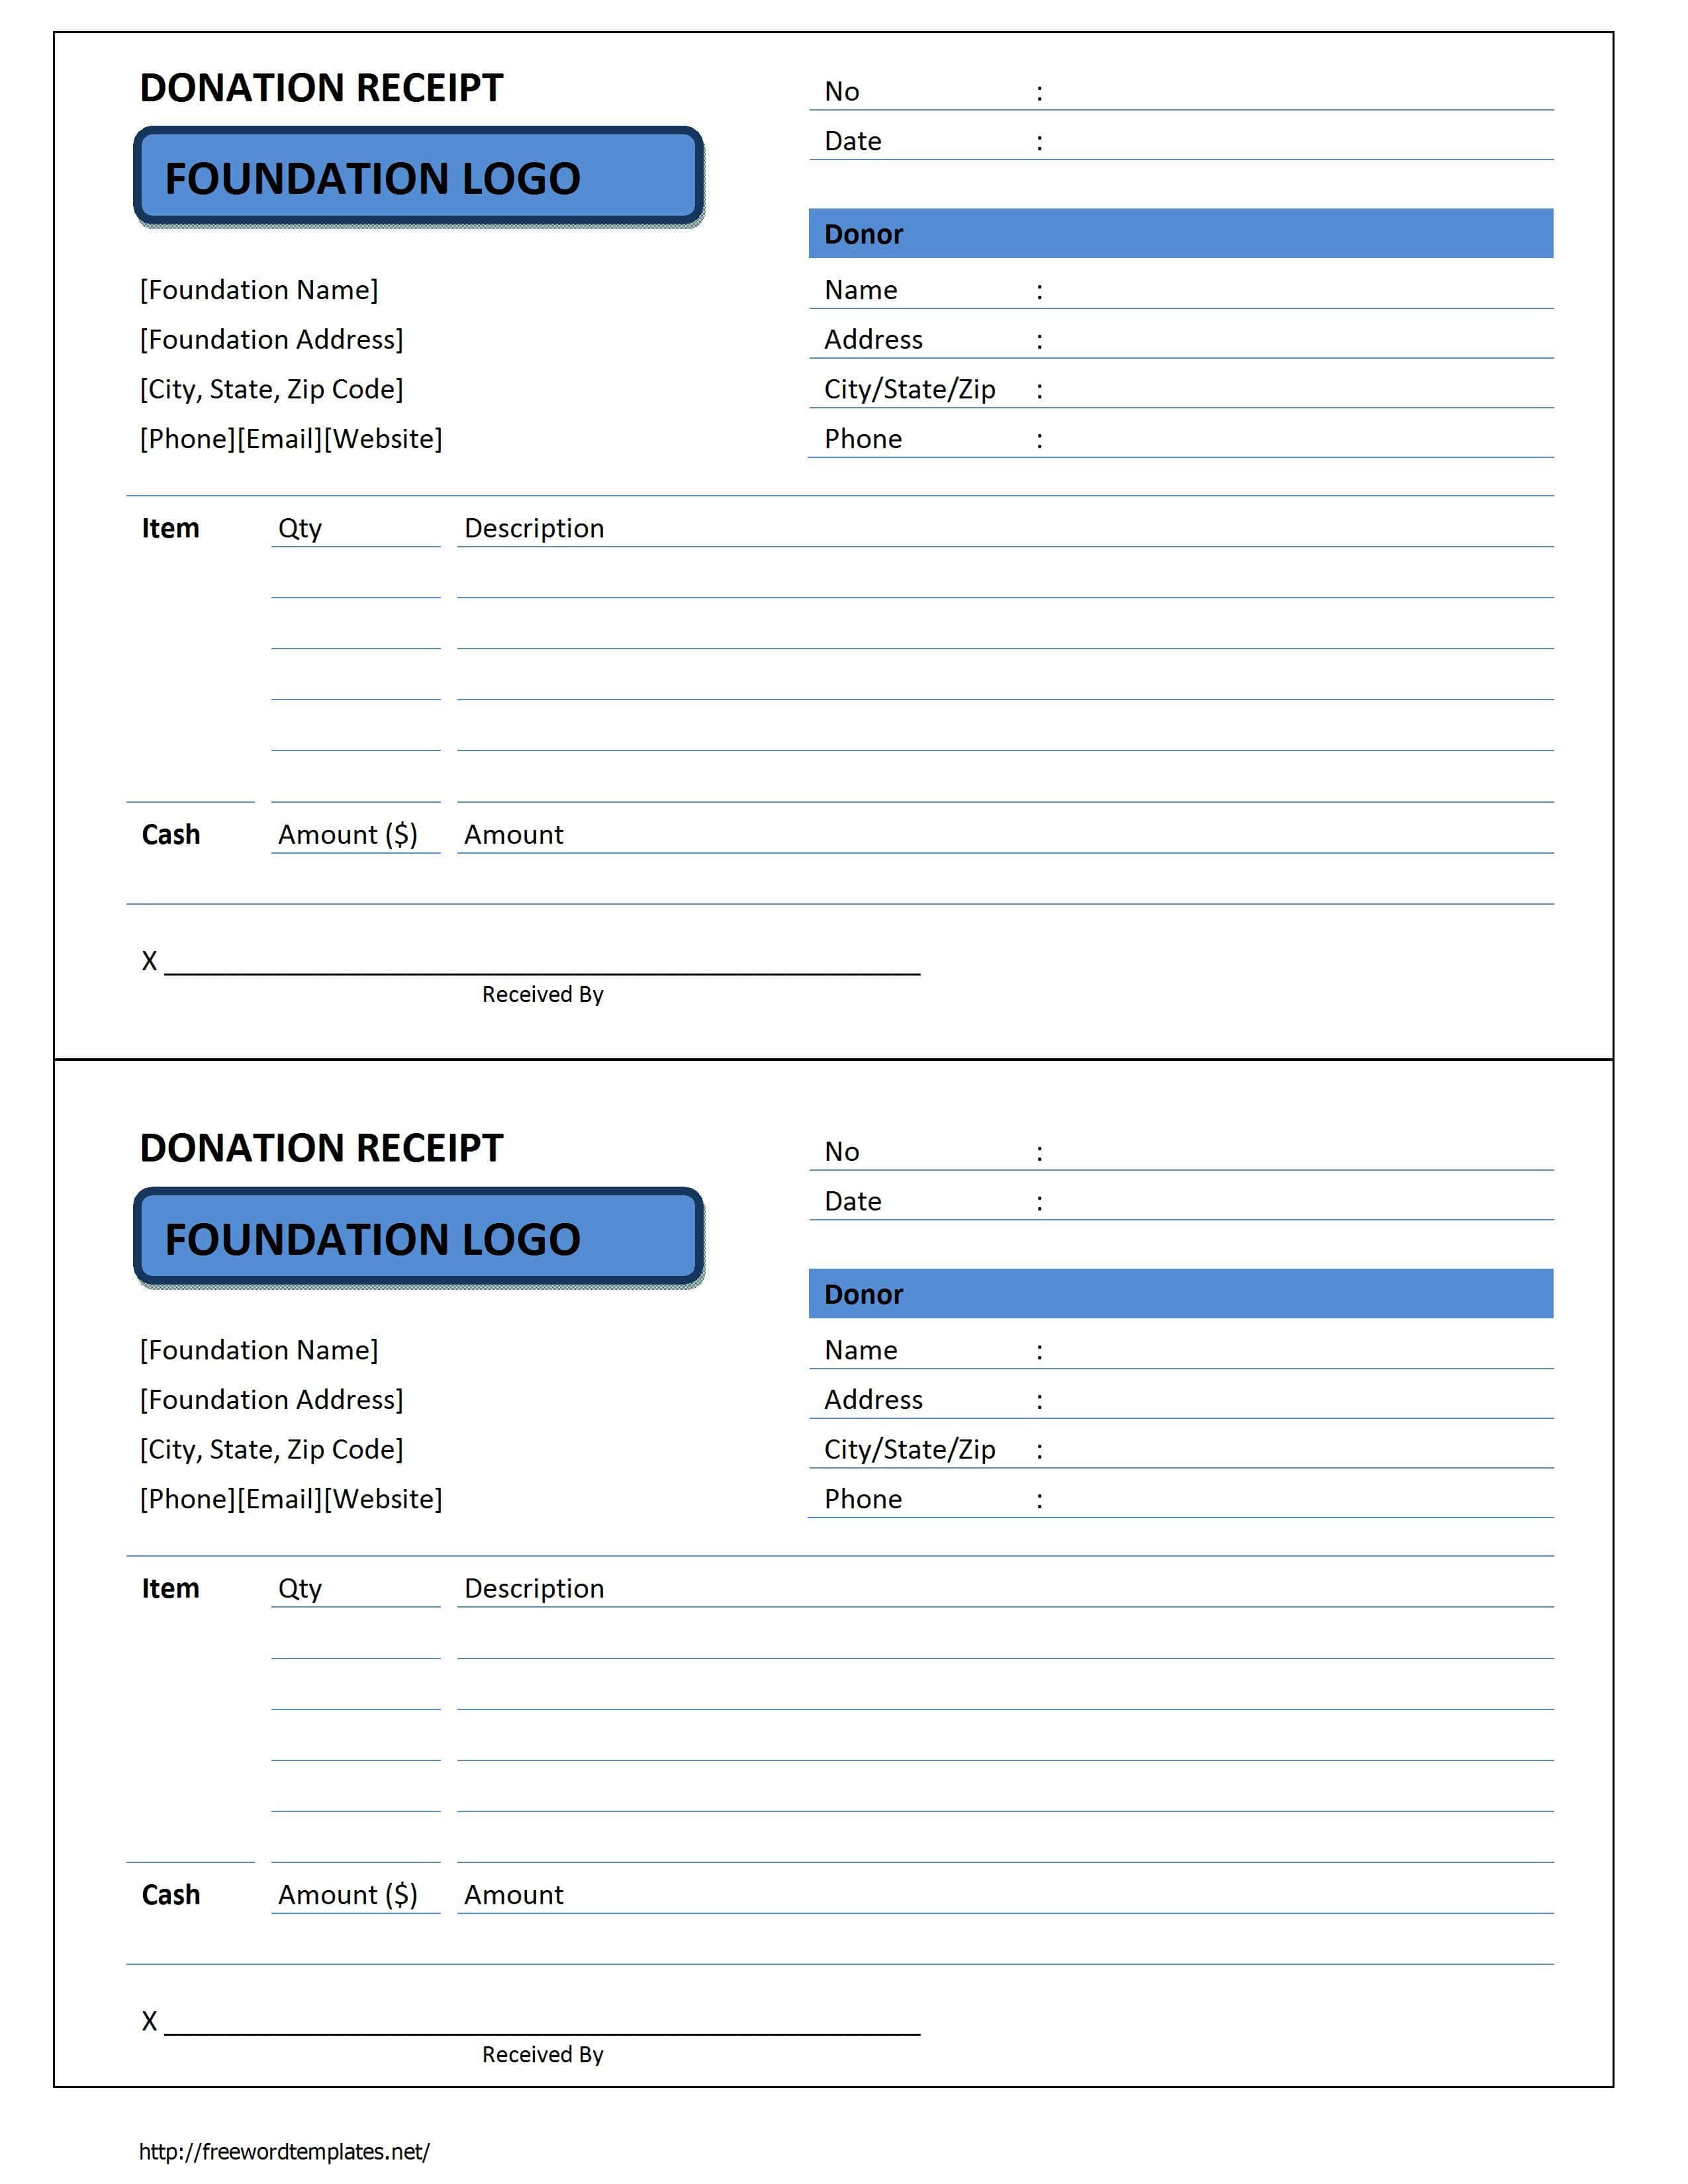 Pinberty Zulfianna On Share | Receipt Template, Invoice For Donation Report Template